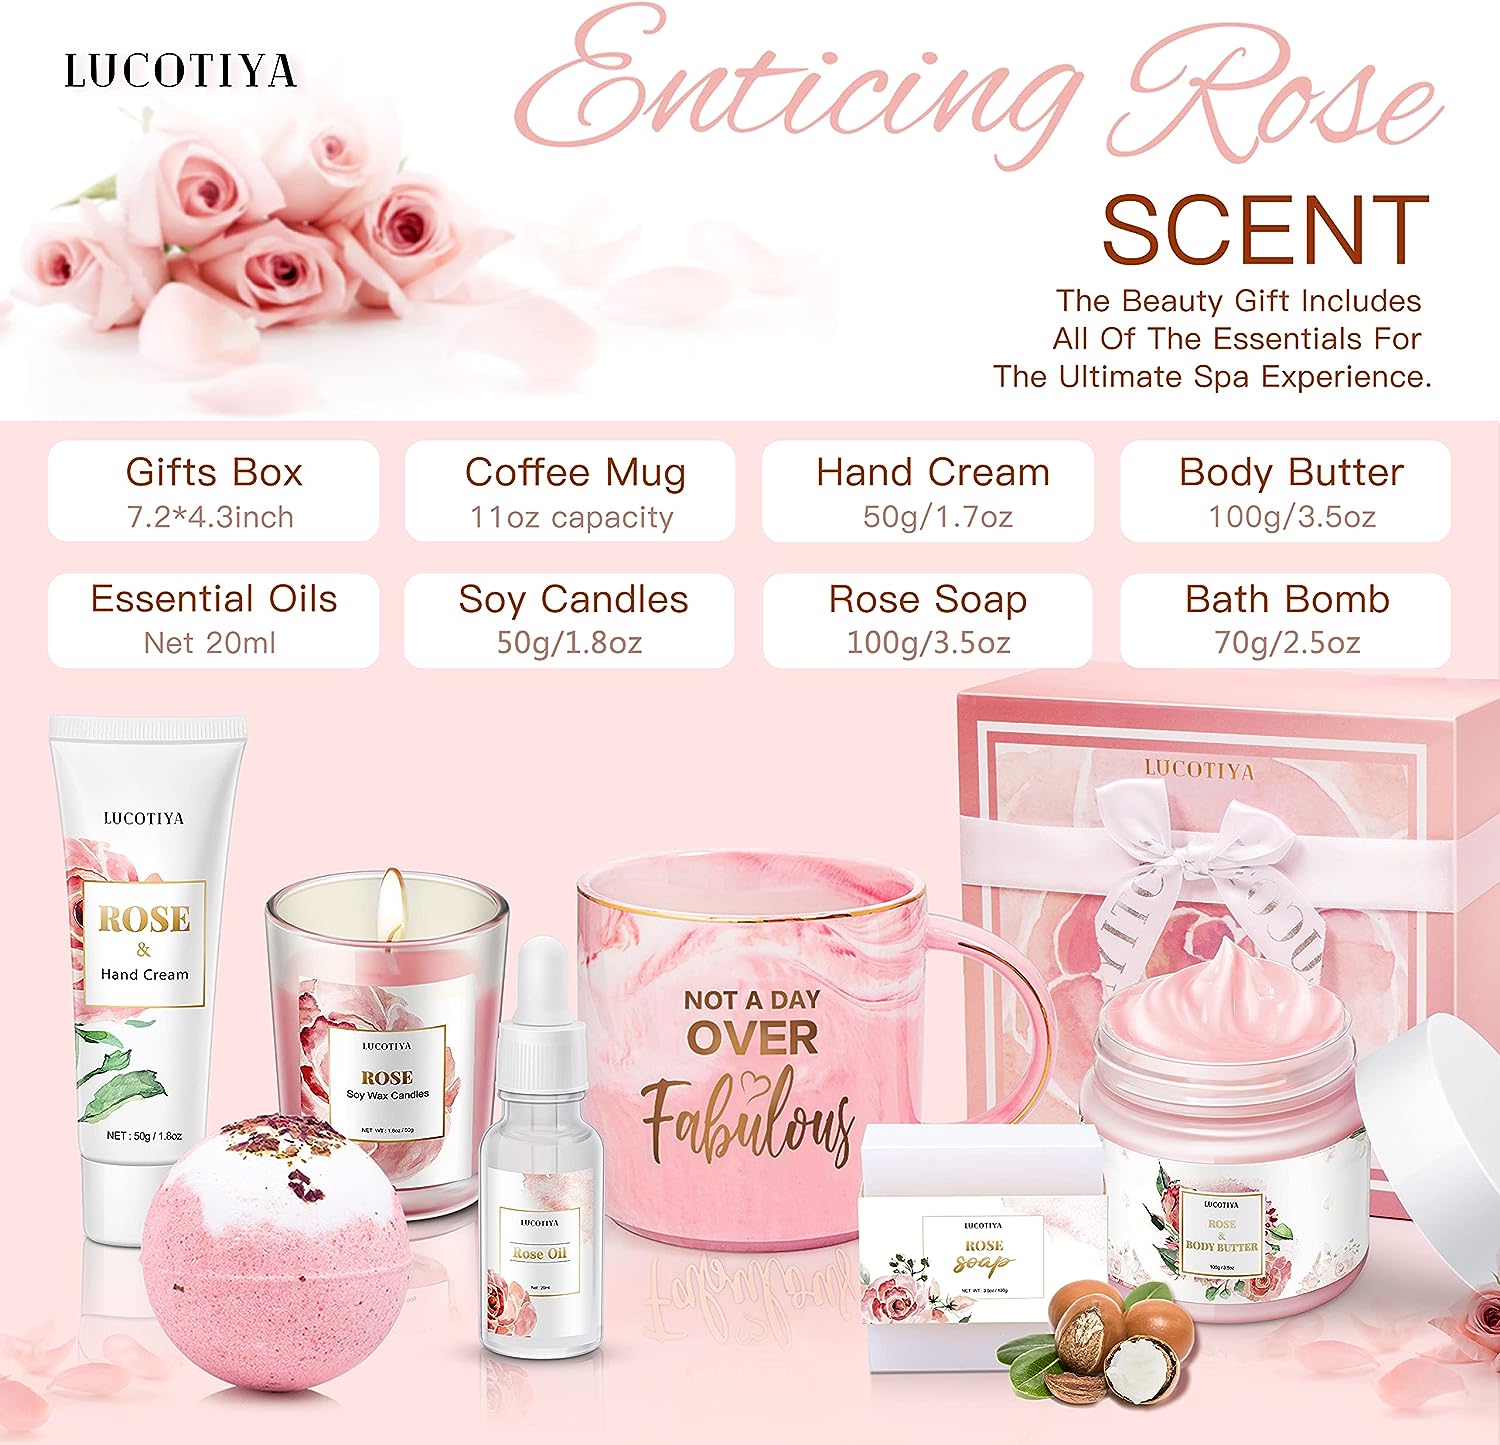 LUCOTIYA Birthday Gifts for Women Best Spa Gifts Baskets Box for Her Wife Mom Best Friend Mother Grandma Bday Bath and Body Kit Sets Self Care Present Beauty Products Package Rose Scent